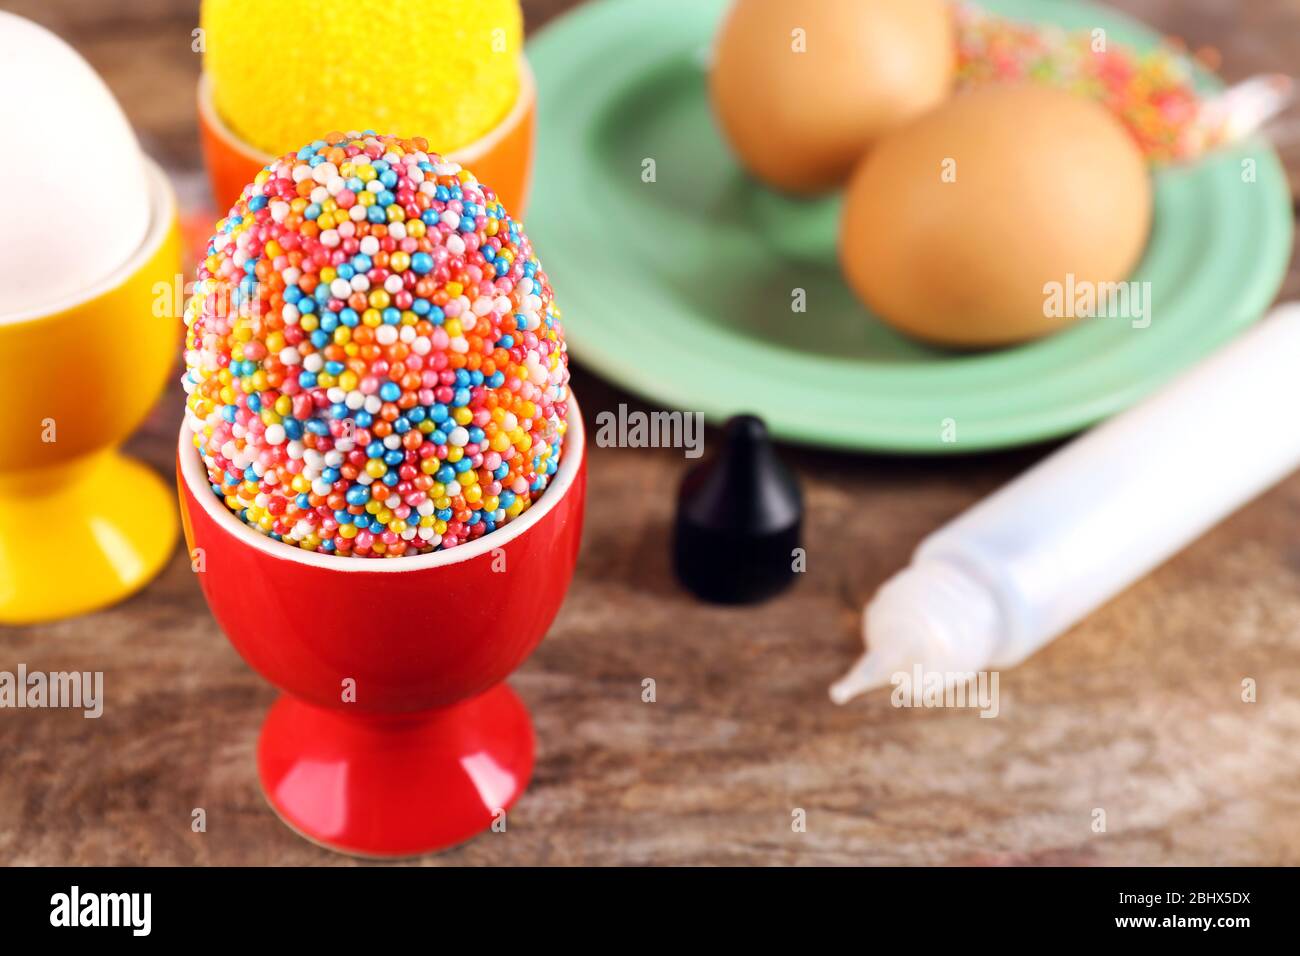 Decoration Easter eggs with colorful beads on wooden table, closeup Stock Photo